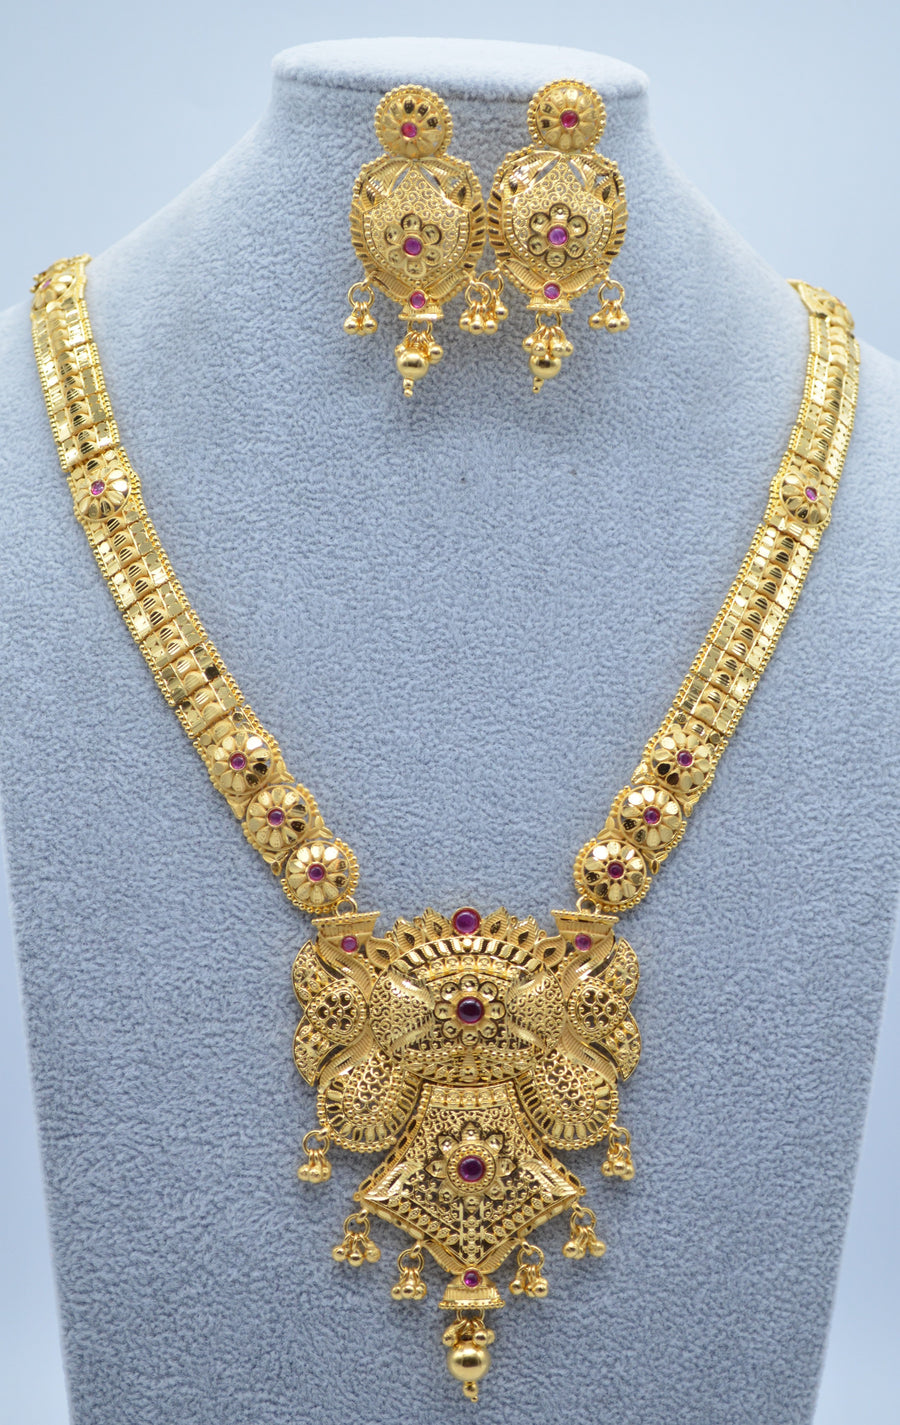 Traditional Long Rani Haar - 1 Gram Gold Plated Necklace Set Necklaces